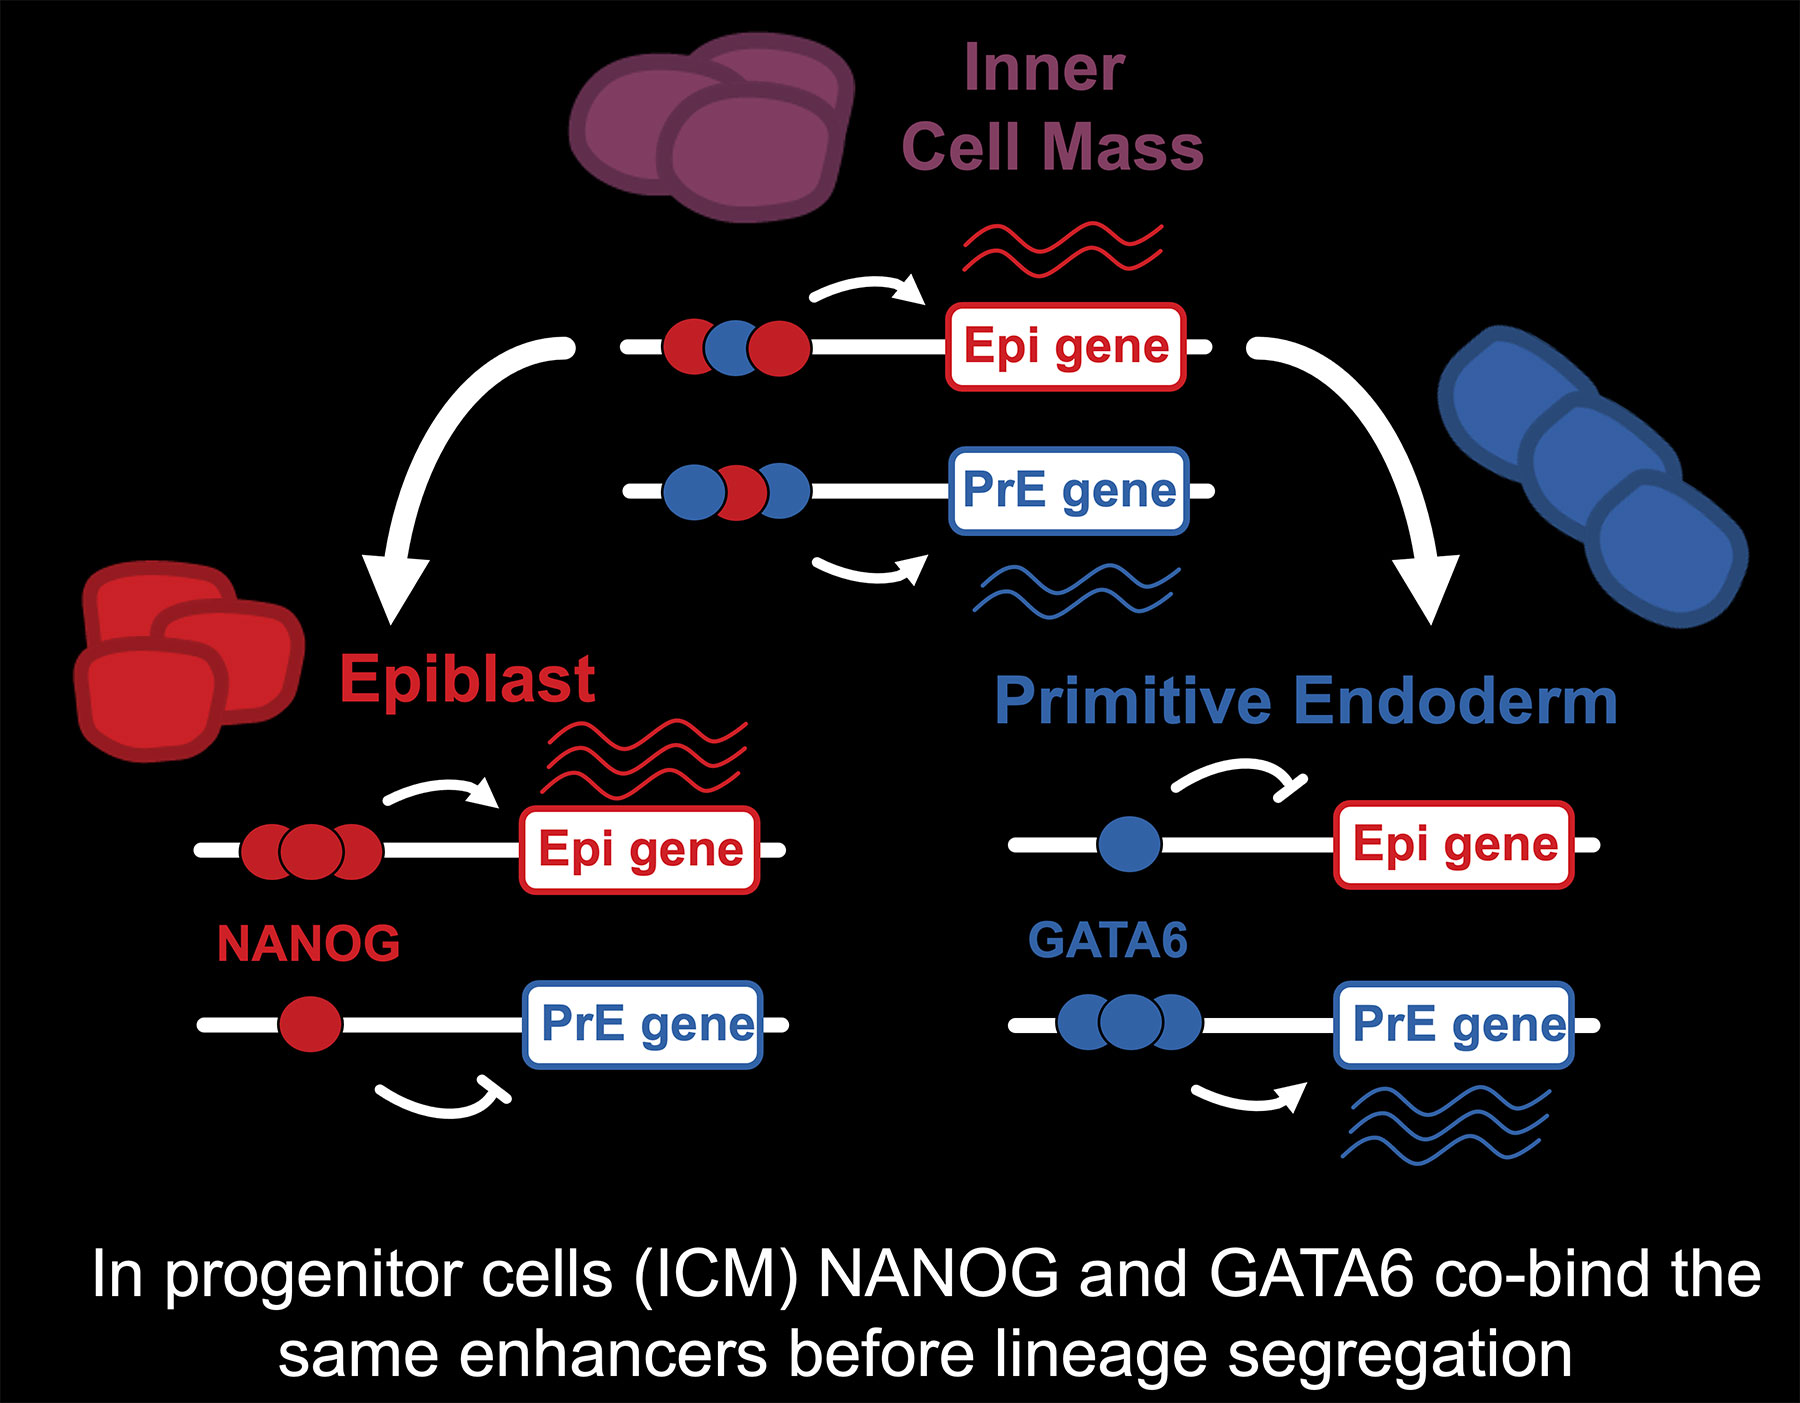 Image shows a scheme depicting changes in NANOG and GATA6 binding during ICM differentiation. Text on image reads In progenitor cells (ICM) NANOG and GATA6 co-bind the same enhancers before lineage segregation.